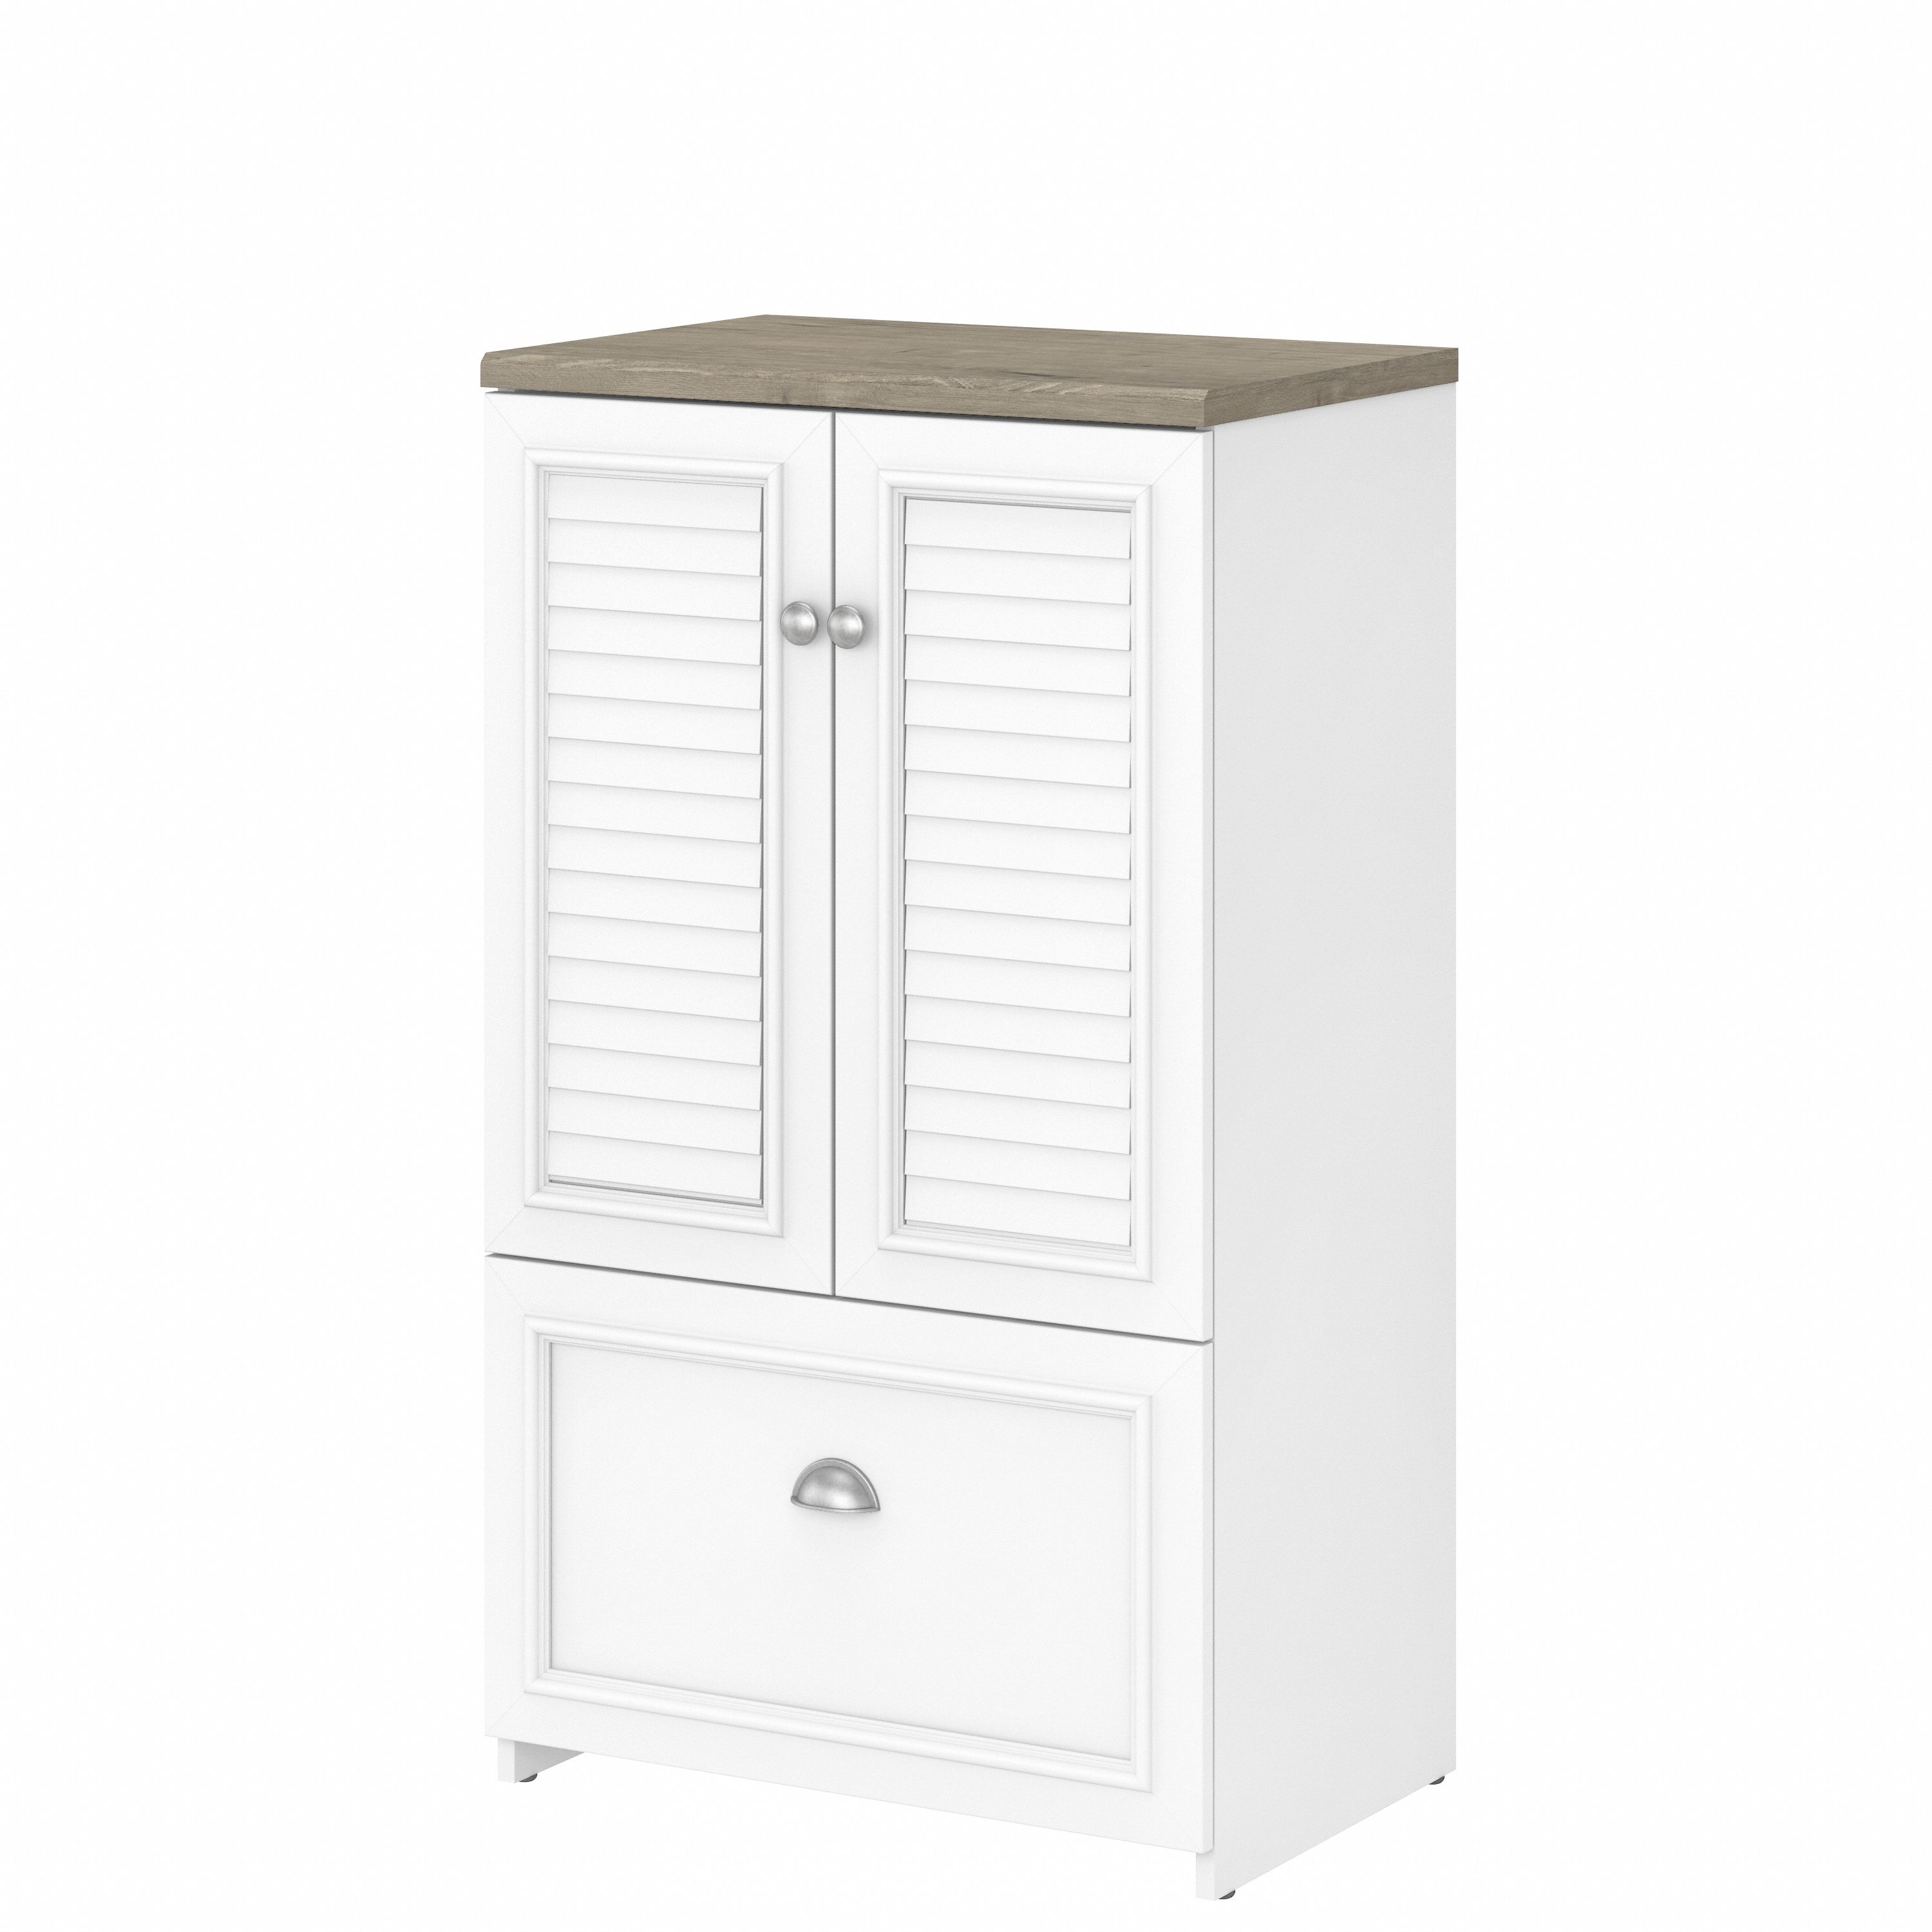 Shop Bush Furniture Fairview 2 Door Storage Cabinet with File Drawer 02 WC53680-03 #color_shiplap gray/pure white